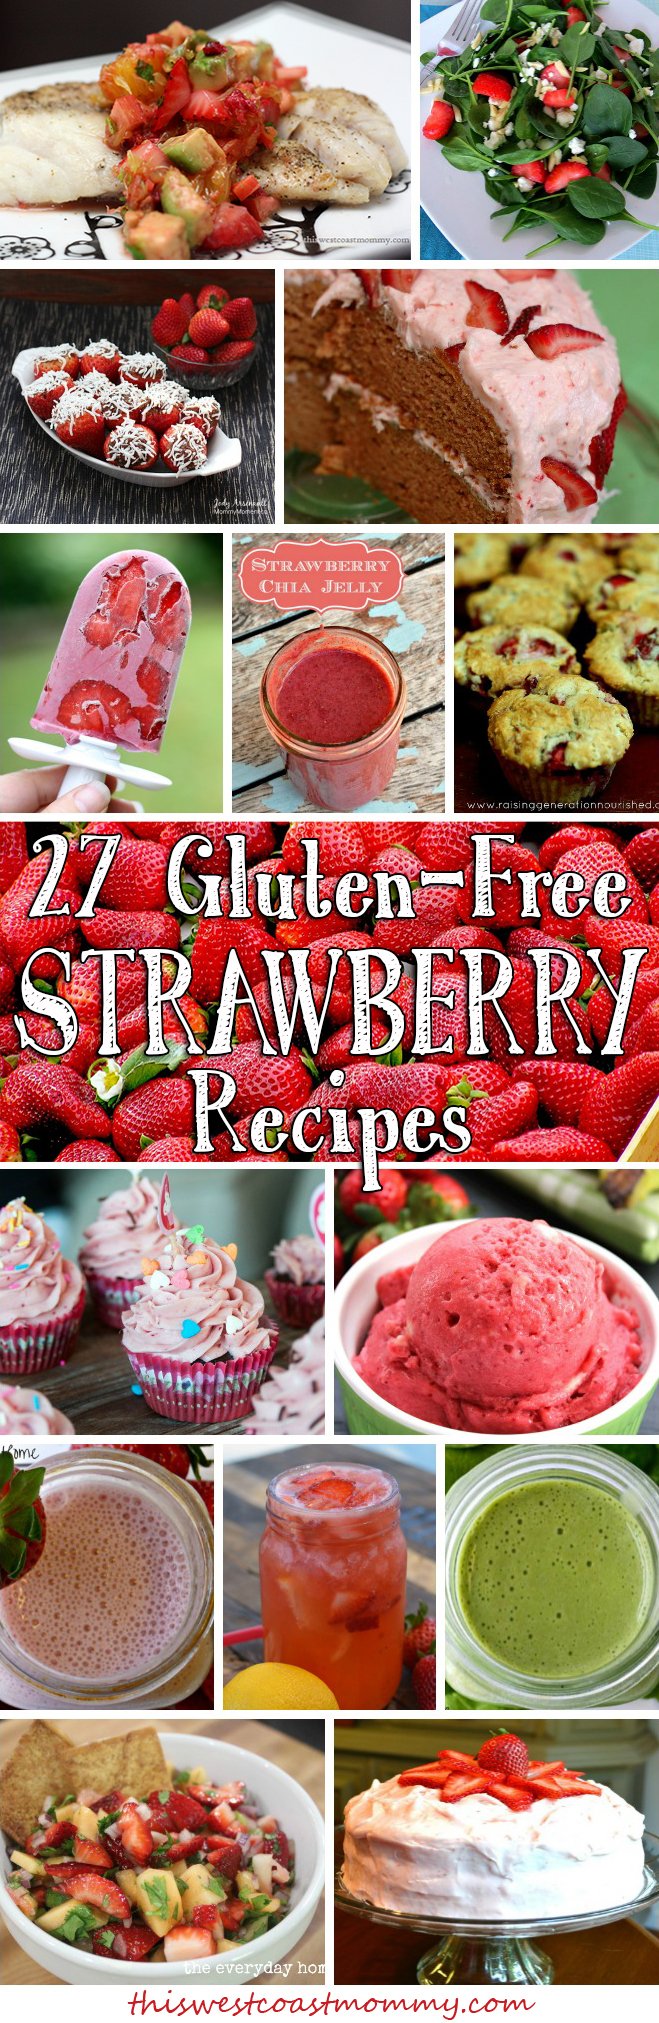 27 Delicious Gluten-free Strawberry Recipes for Strawberry Month!